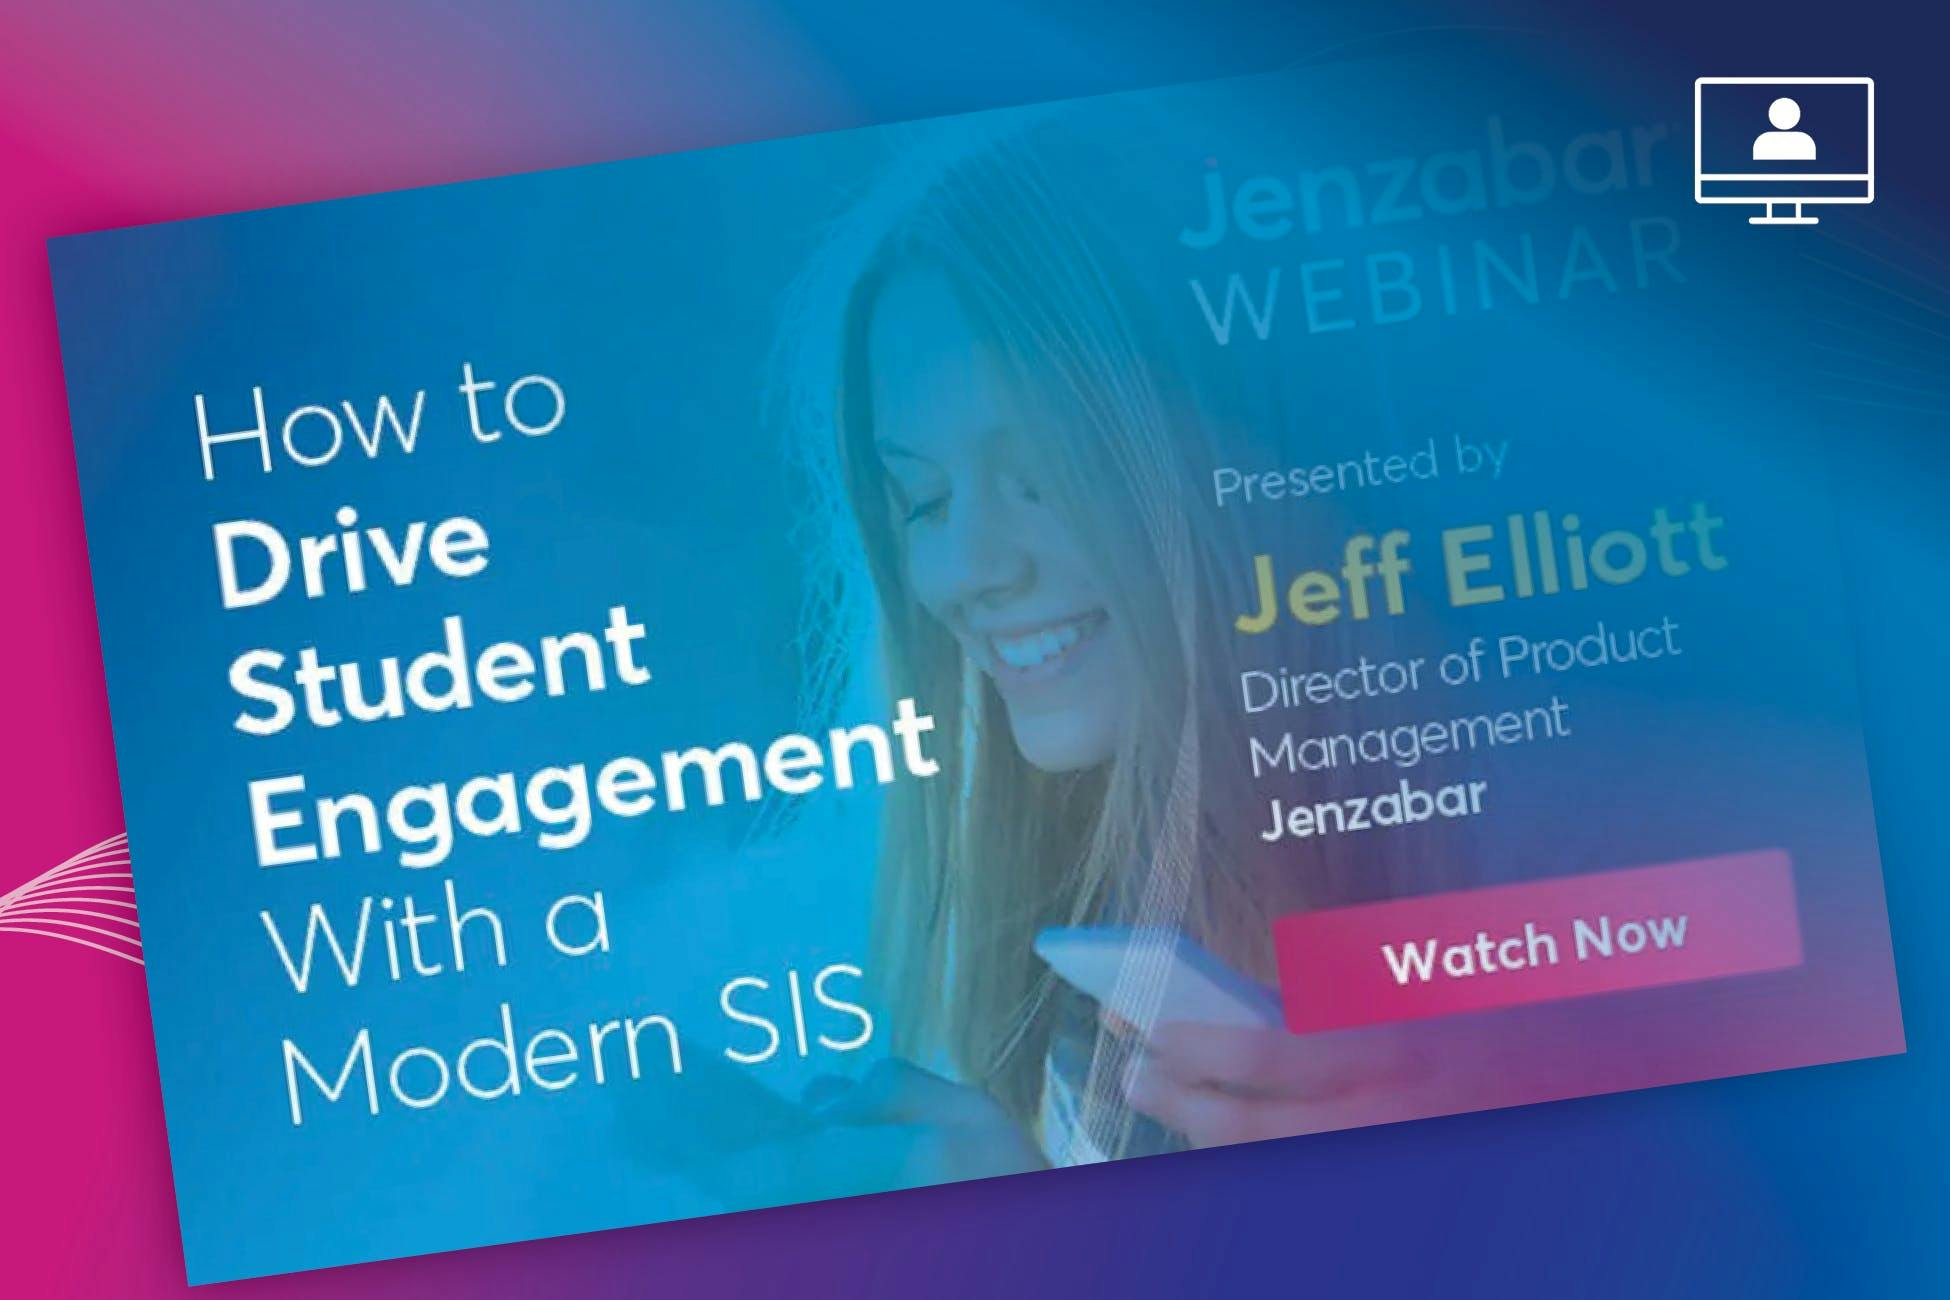 Webinar: How to Drive Student Engagement With a Modern SIS